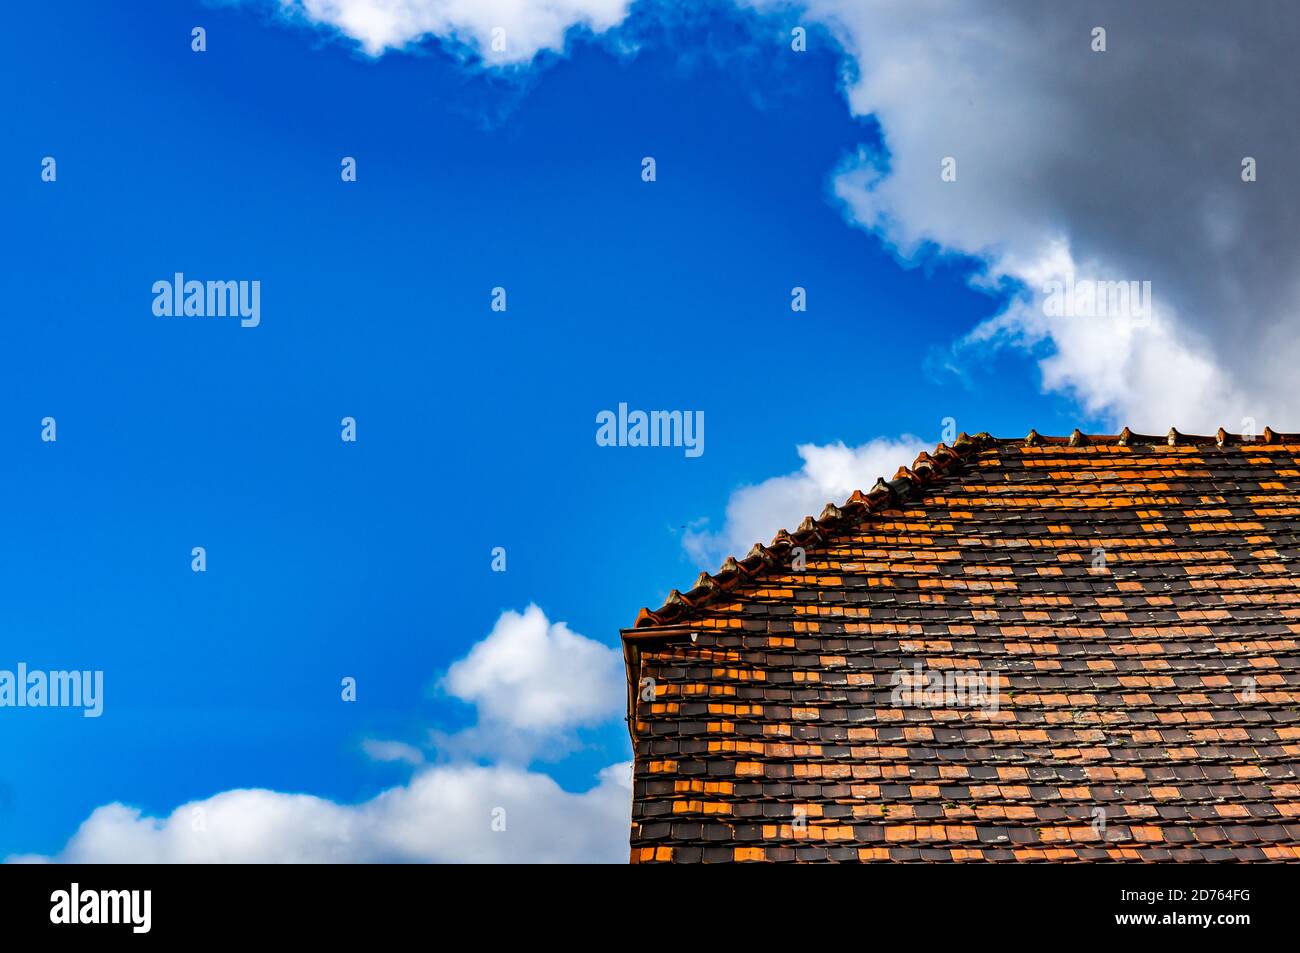 Closeup shot of a tiled roof detail under a cloudy sky Stock Photo